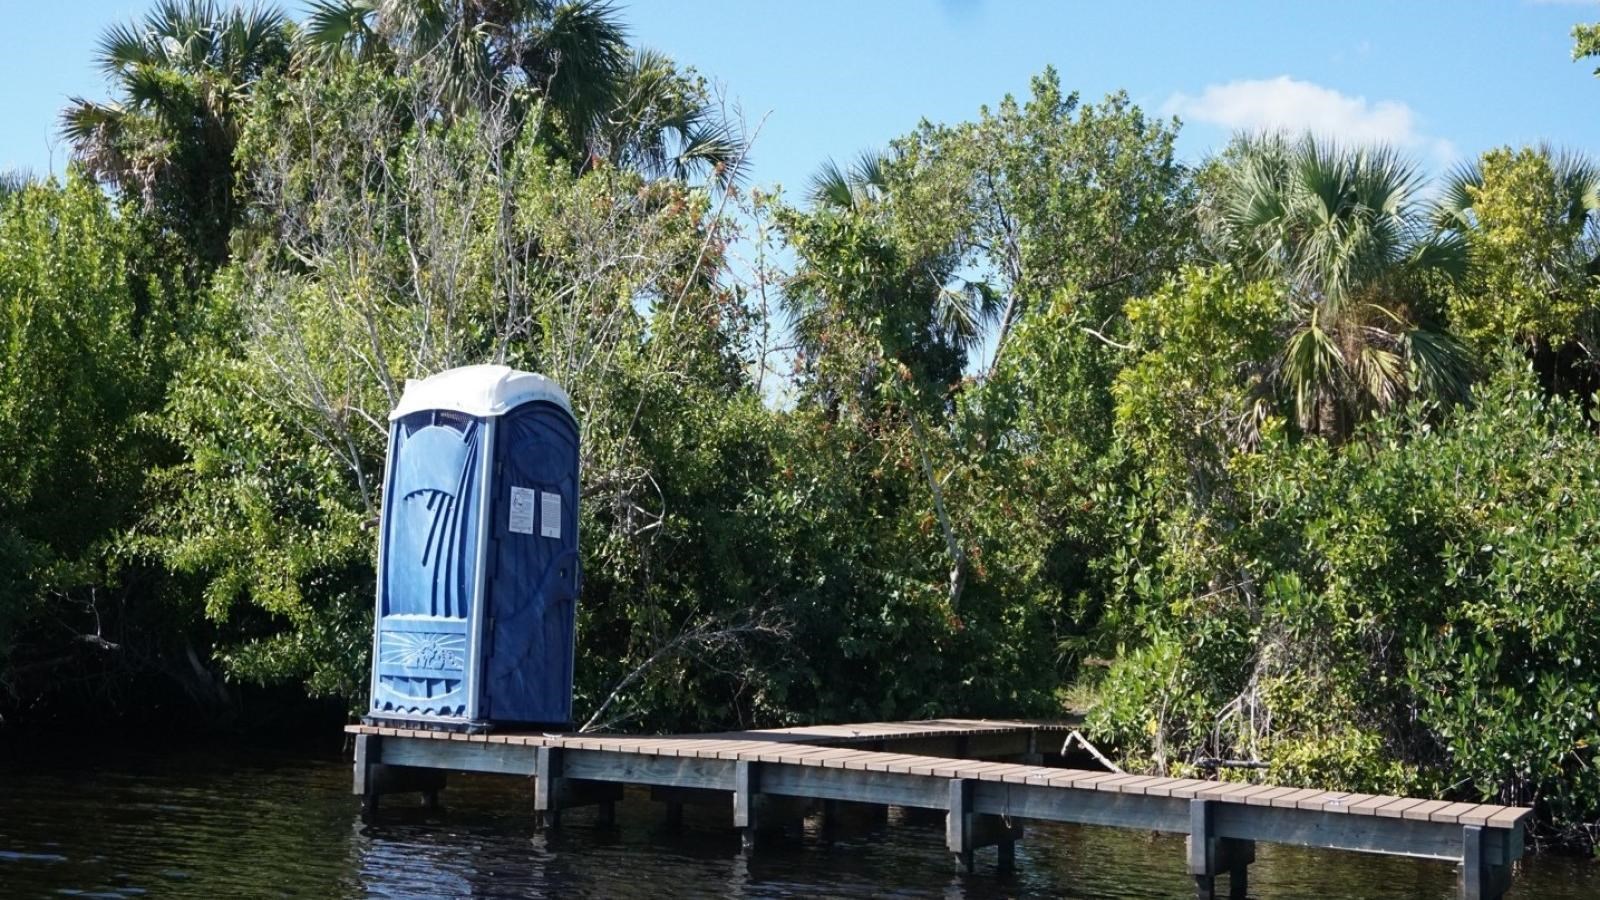 A wooden dock with a blue portable toilet. The dock path bends and disappears into vegetation